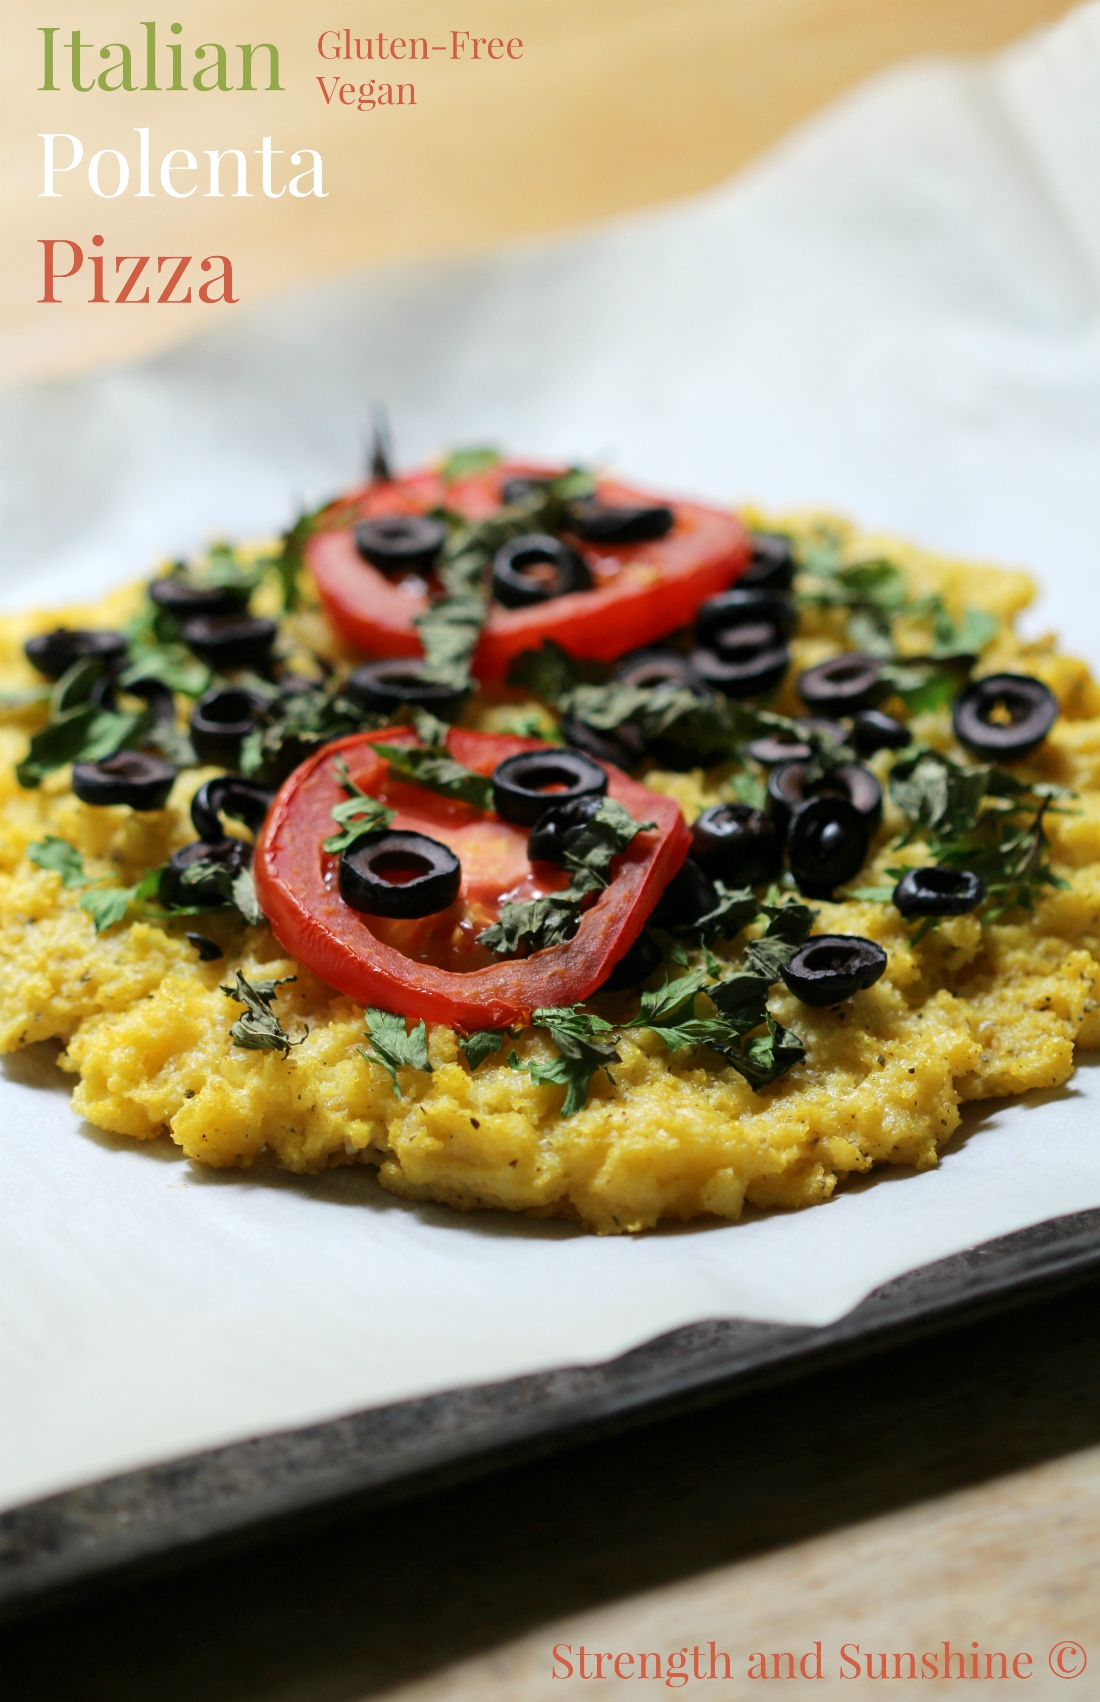 Italian Polenta Pizza | Strength and Sunshine @RebeccaGF666 A simple polenta crust pizza topped with fresh basil, parsley, sliced black olives and ripe red tomato. An Italian classic made gluten-free and vegan without missing one hint of flavor! #CalOlivesMedRecipe